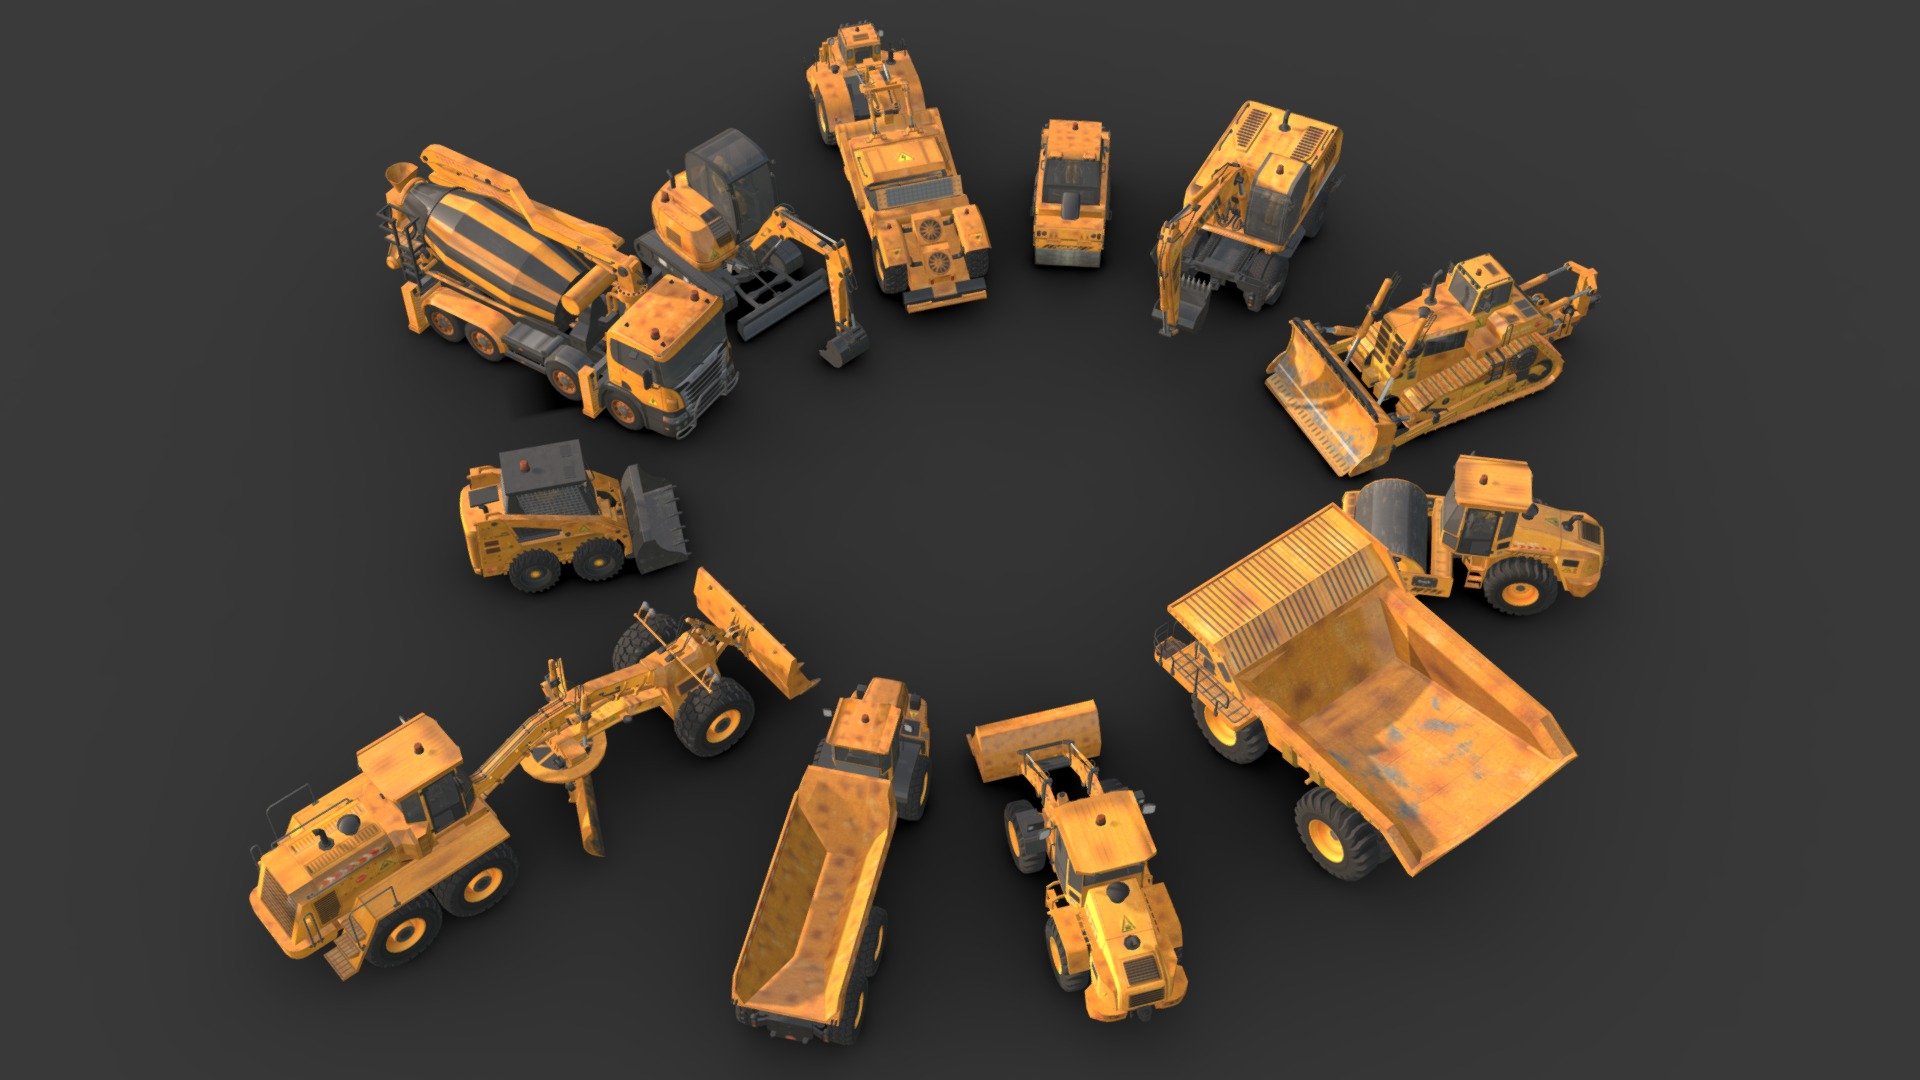 *Construction Vehicles Pack

*The package contains 12 vehicles.

*Average poly count: 20k tris.

*Textures High Quality.

*Low poly (Mobile Optimized).

*Vehicles have separate parts.

*The inside of these models are designed.

*Textures size : 2048 * 2048 / 1024 * 1024 (BMP).

*The main folder is in the additional files 3d model